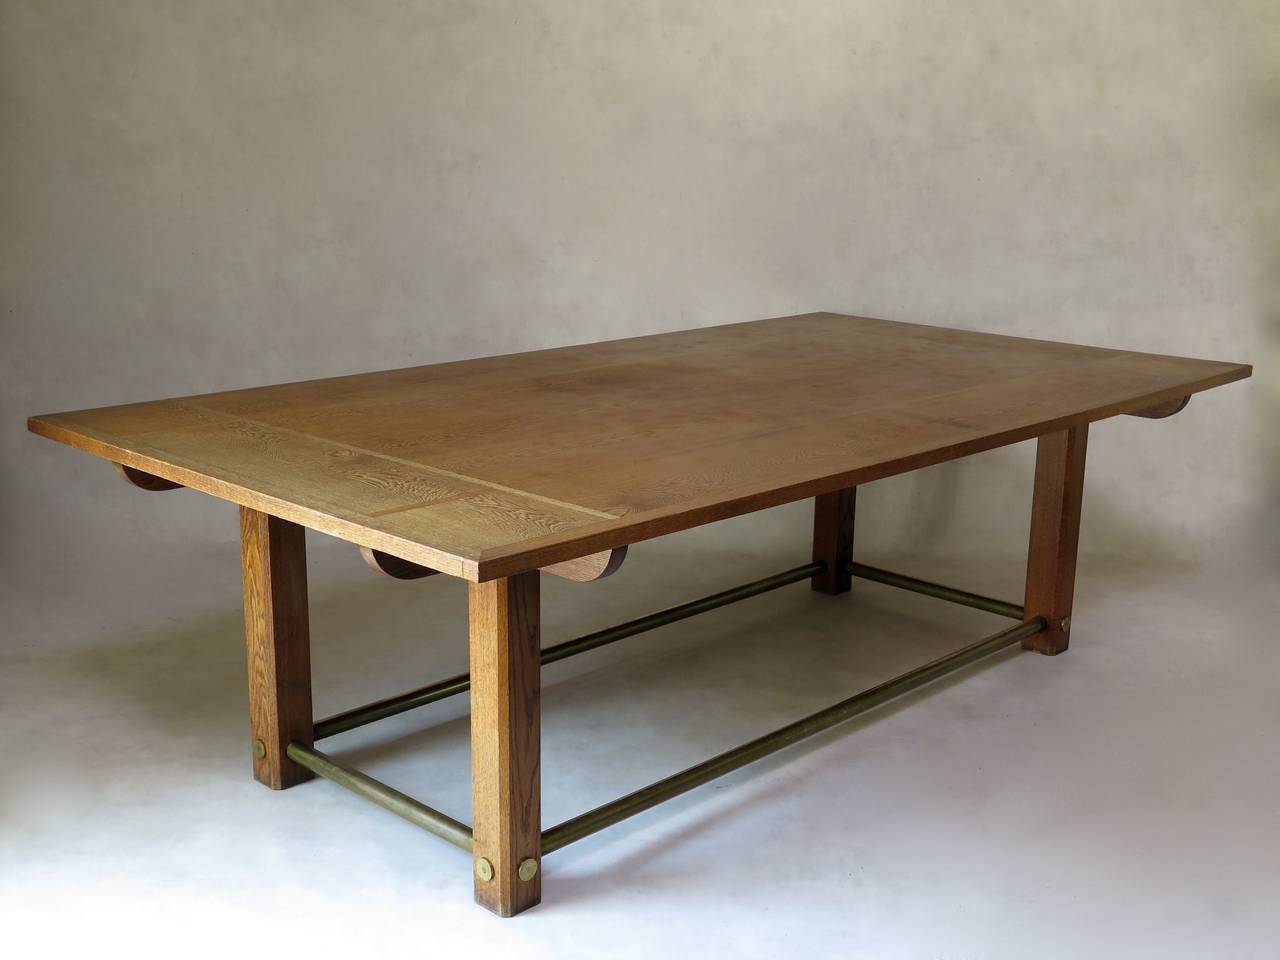 Very chic French dining, centre or library table of Minimalist design, in oak. The tabletop has a chequered motif and is raised on four square legs joined together with a brass stretcher.